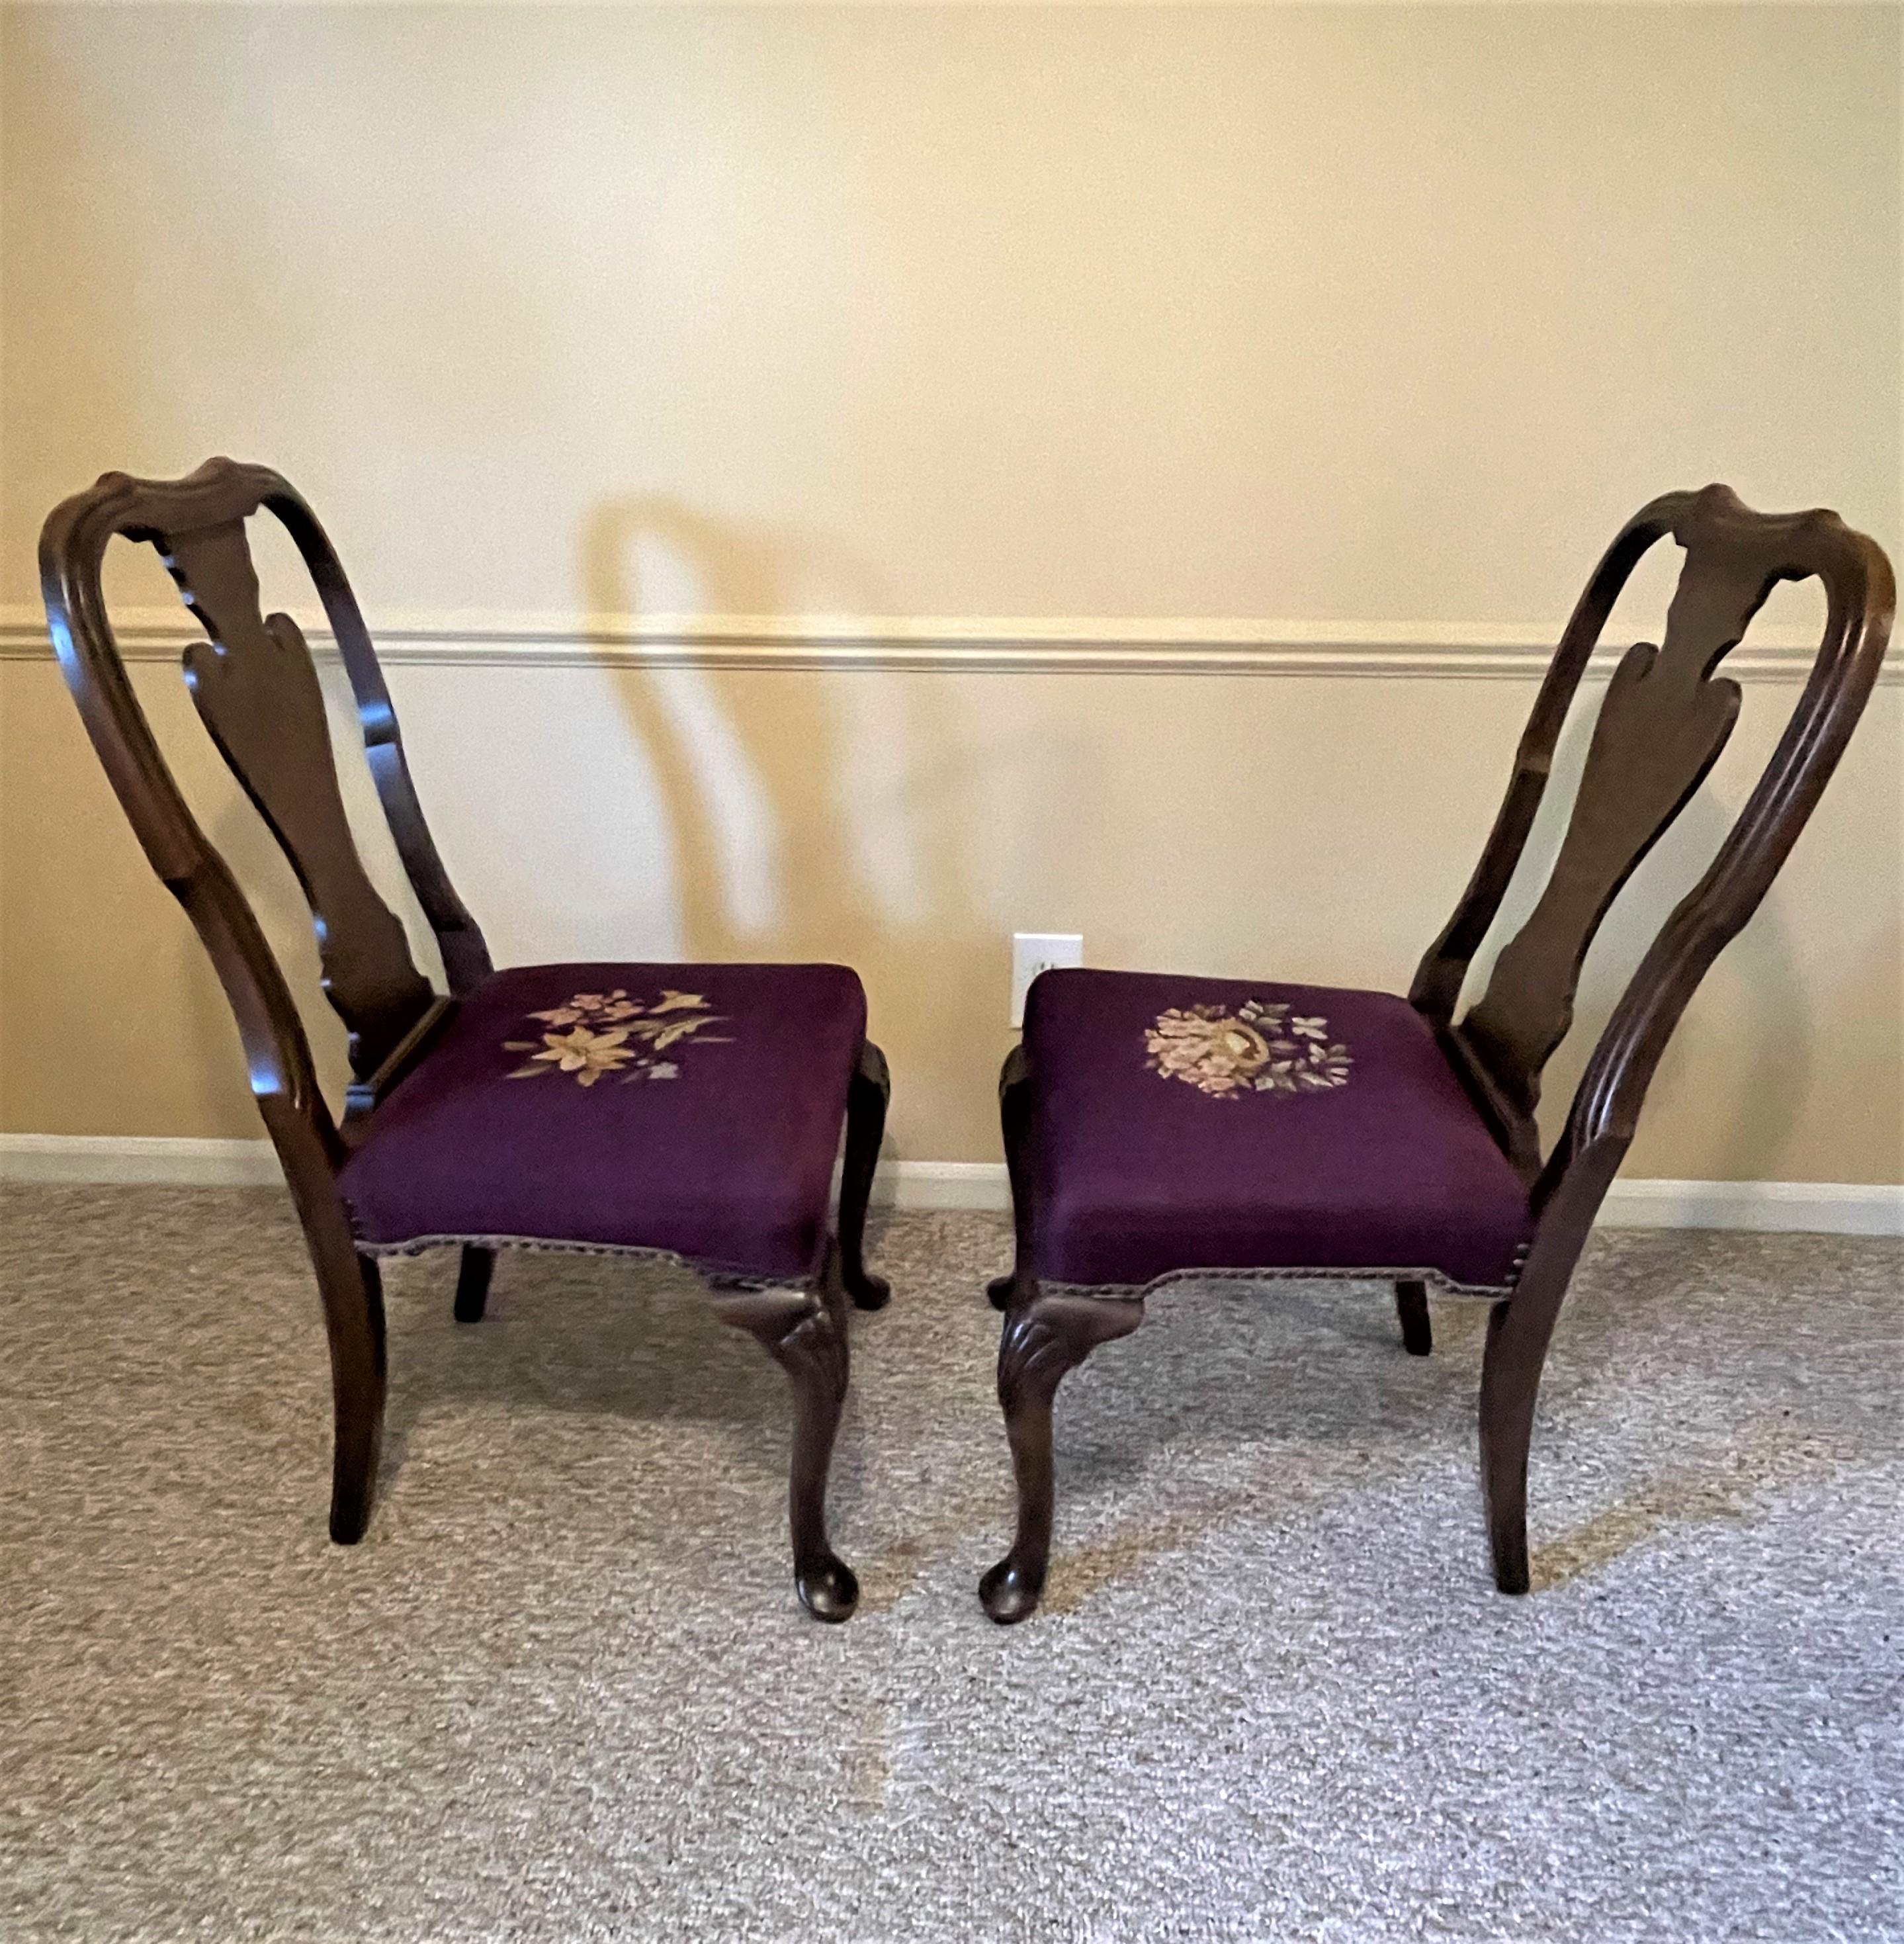 1930s Queen Ann Solid Walnut Dining Chairs with Aubergine Wool Needlepoint Seats For Sale 1